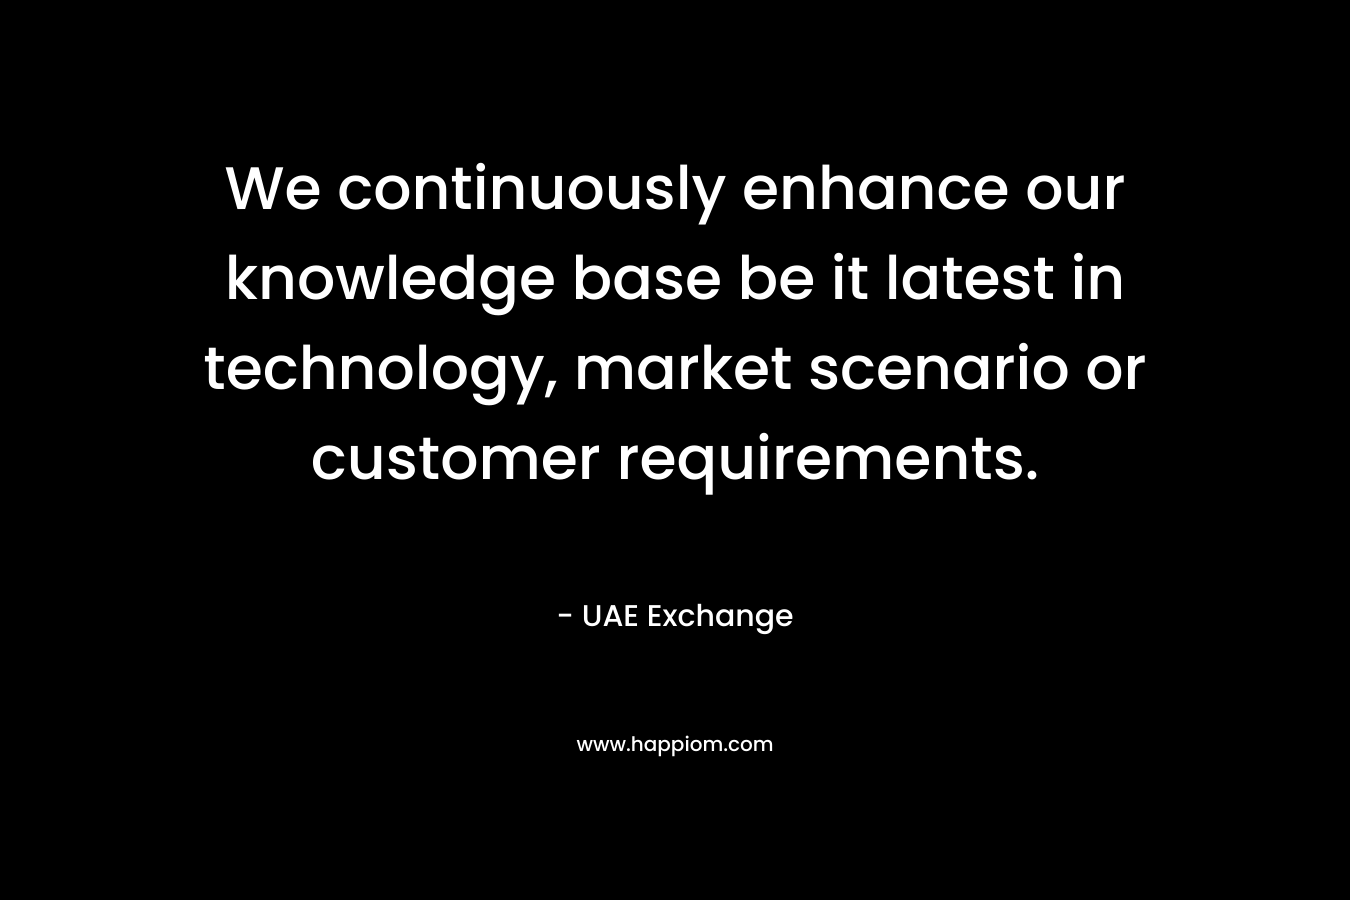 We continuously enhance our knowledge base be it latest in technology, market scenario or customer requirements. – UAE Exchange